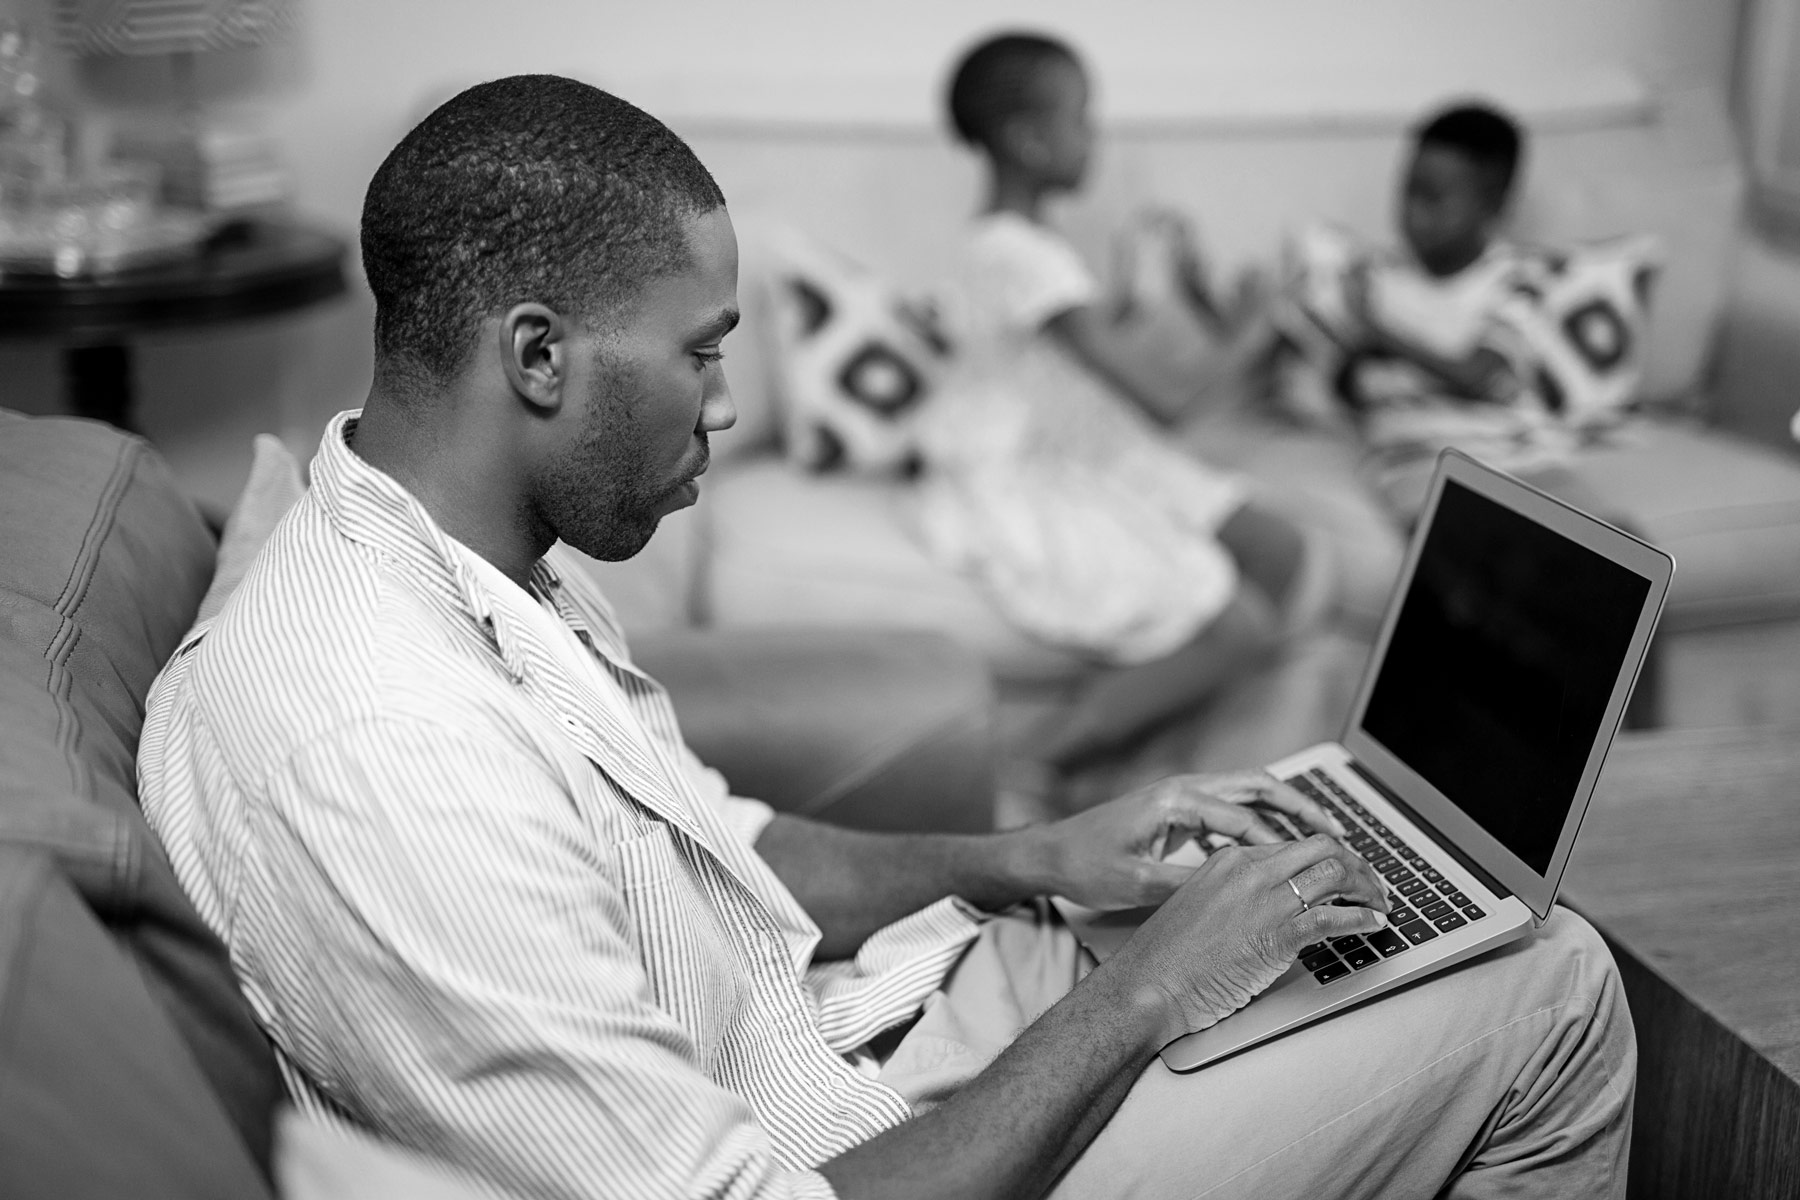 man on computer in living room with children in background